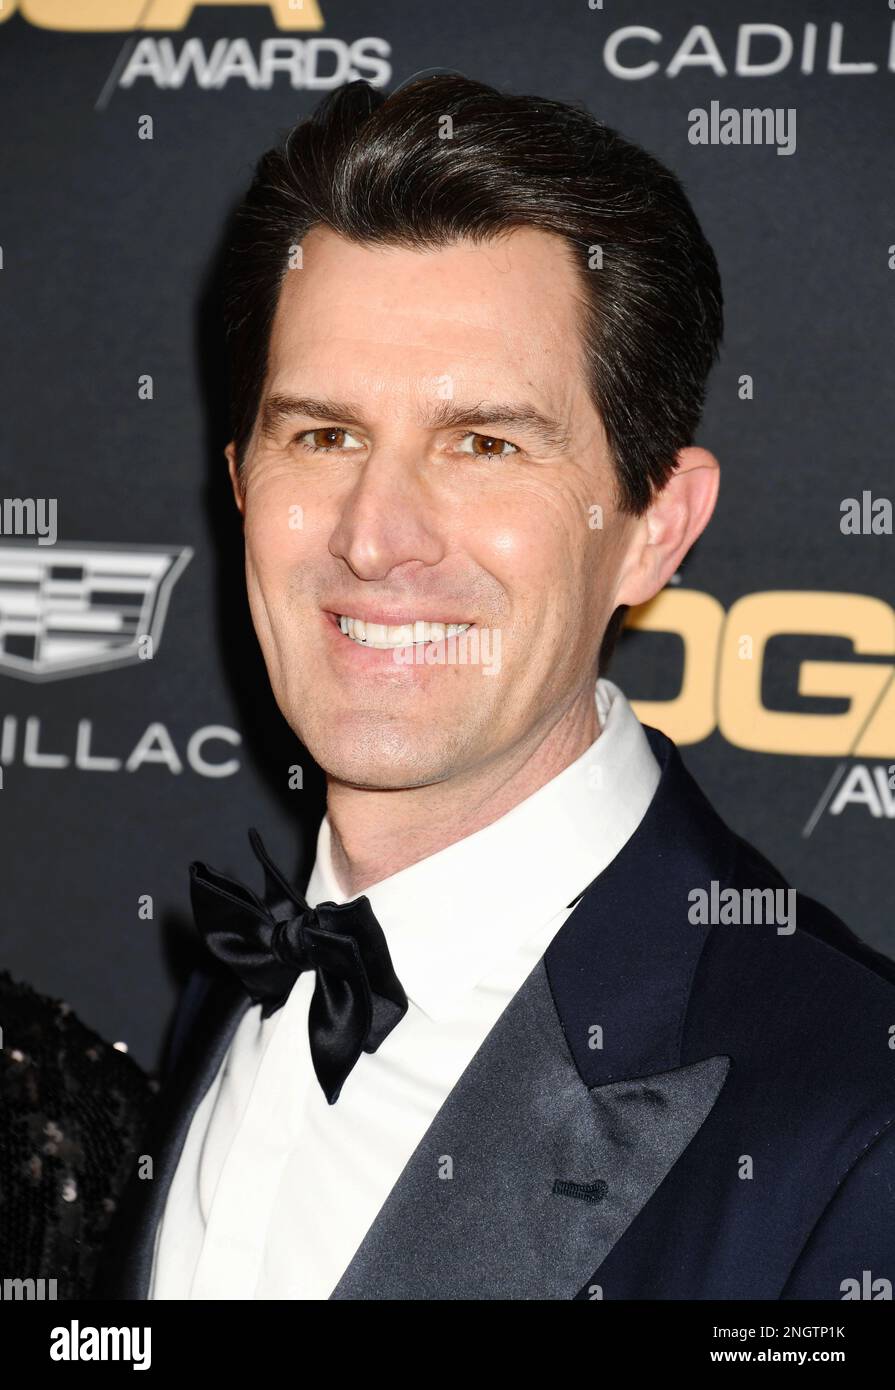 Beverly Hills, California, USA. 18th Feb, 2023. Joseph Kosinski attends the 75th Directors Guild of America Awards at The Beverly Hilton on February 18, 2023 in Beverly Hills, California. Credit: Jeffrey Mayer/Jtm Photos/Media Punch/Alamy Live News Stock Photo